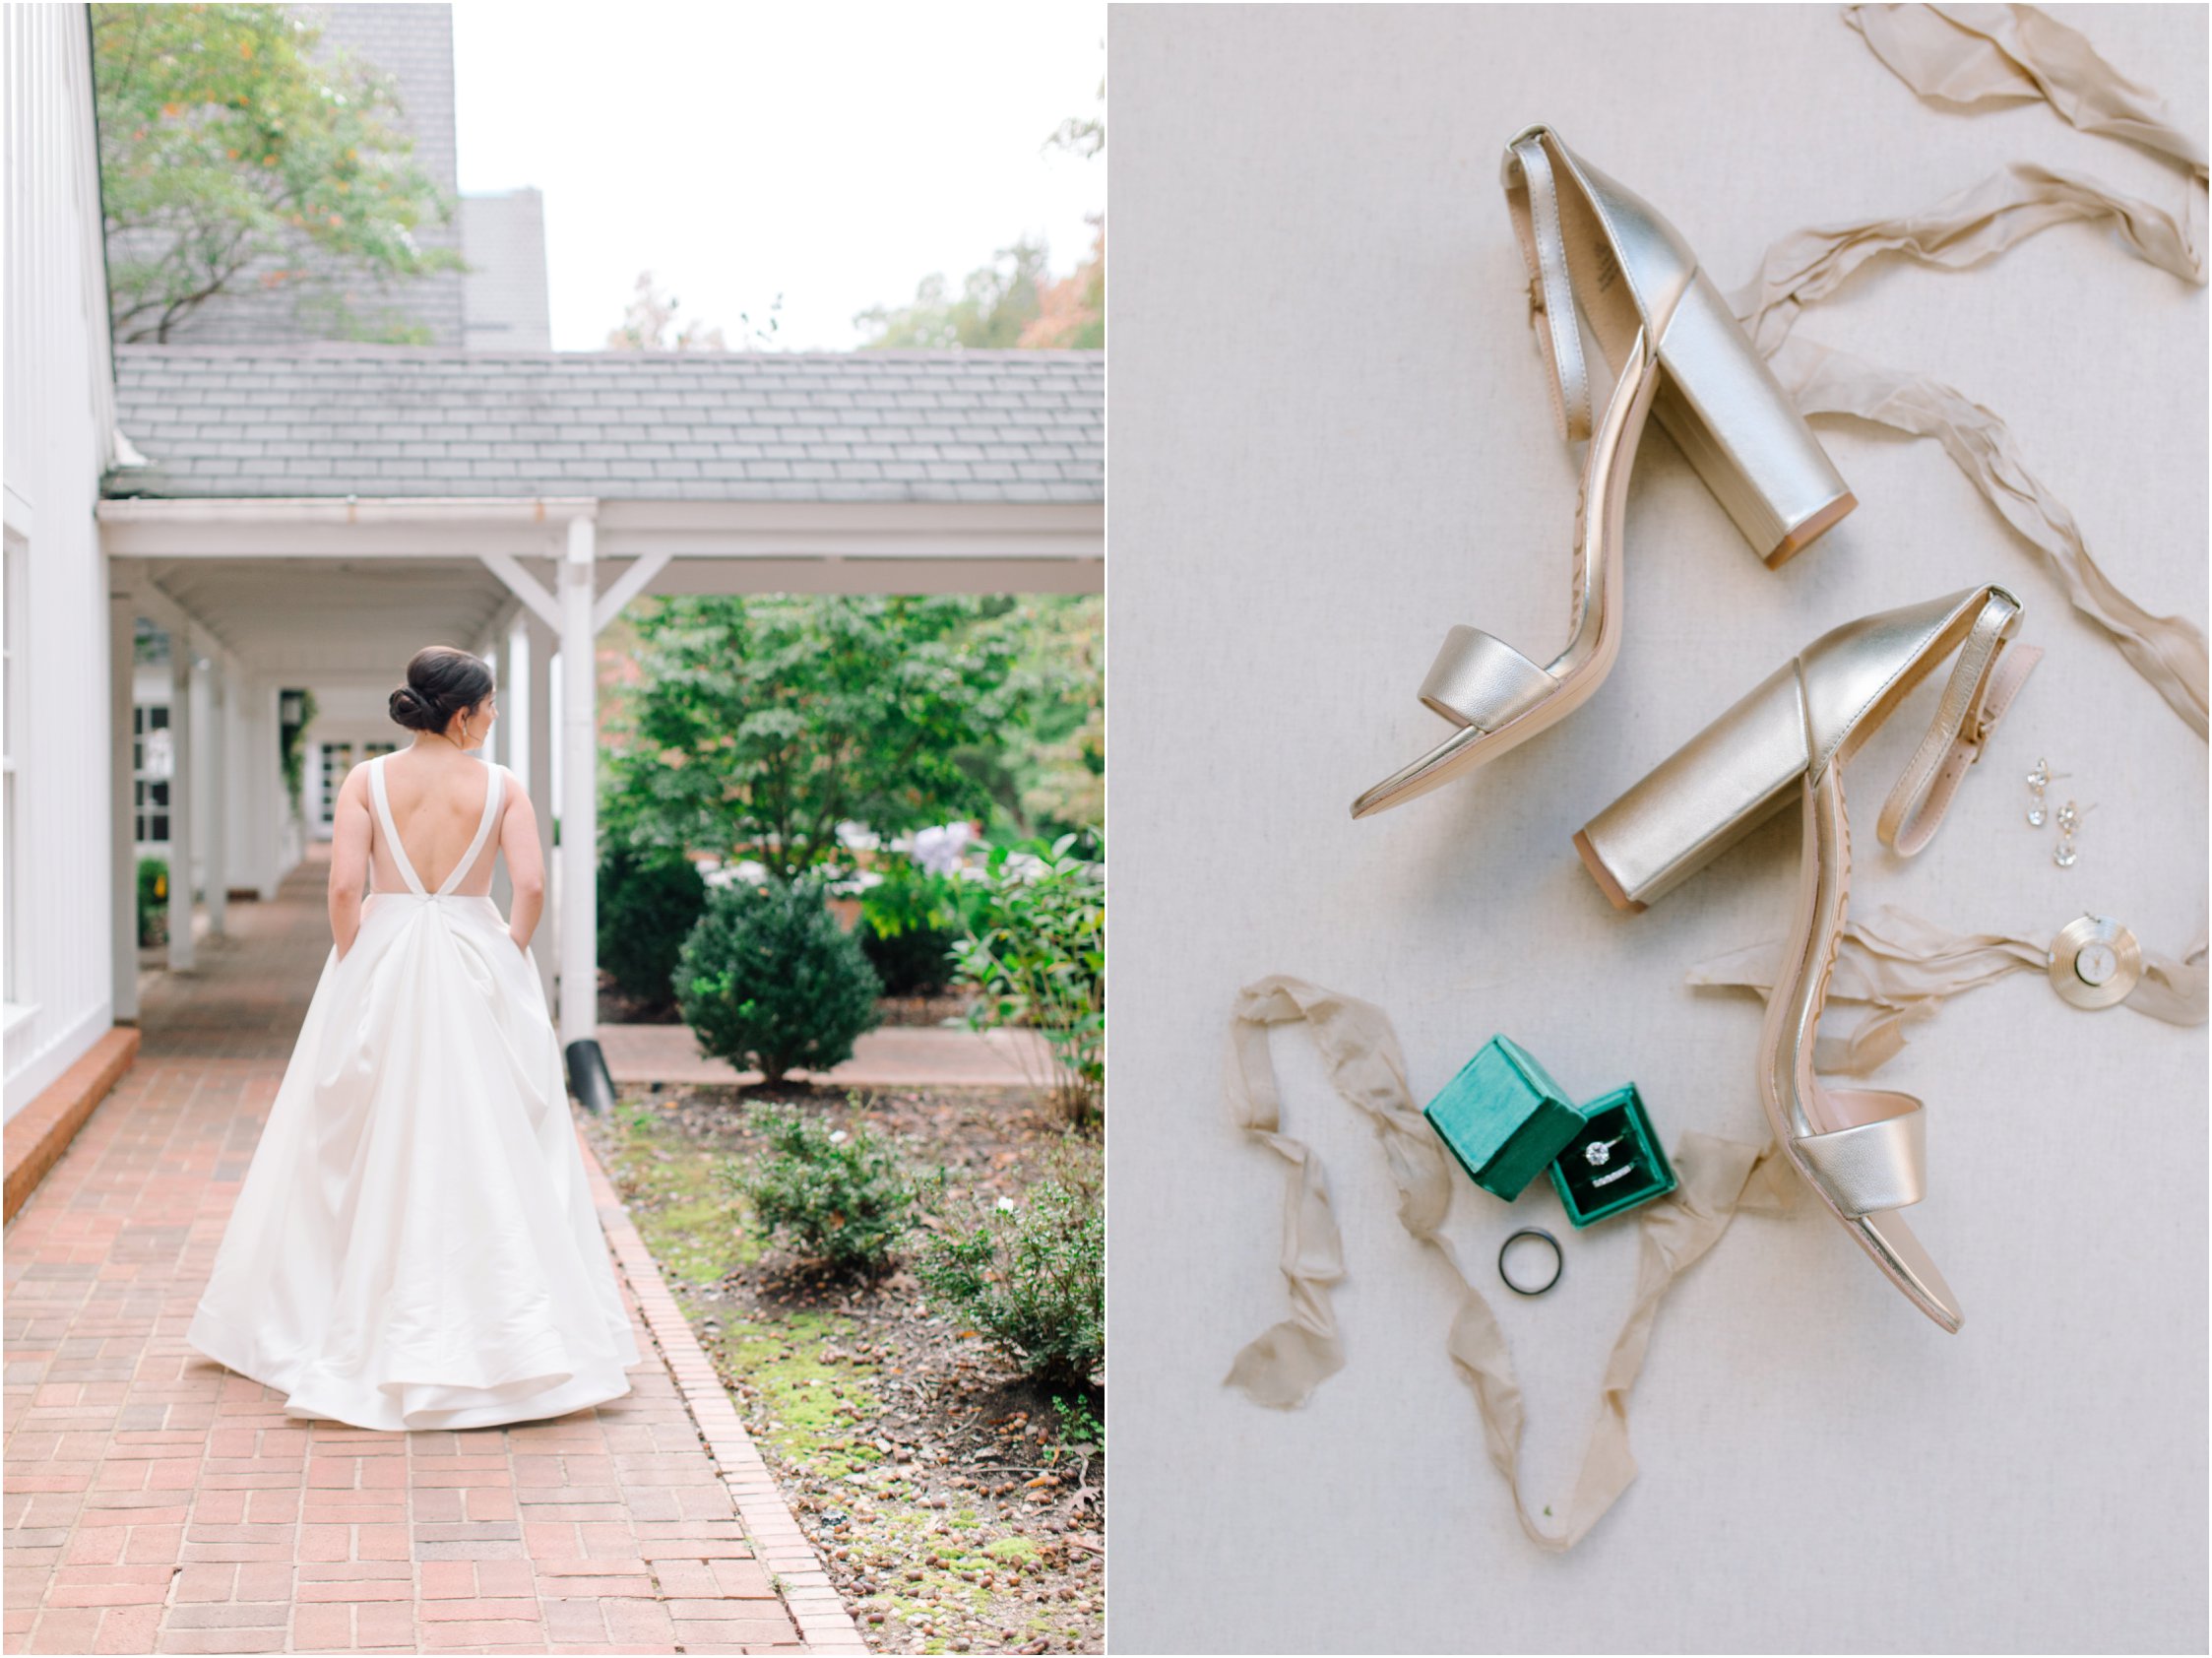 A gallery with the bride's shoes, rings and her dress